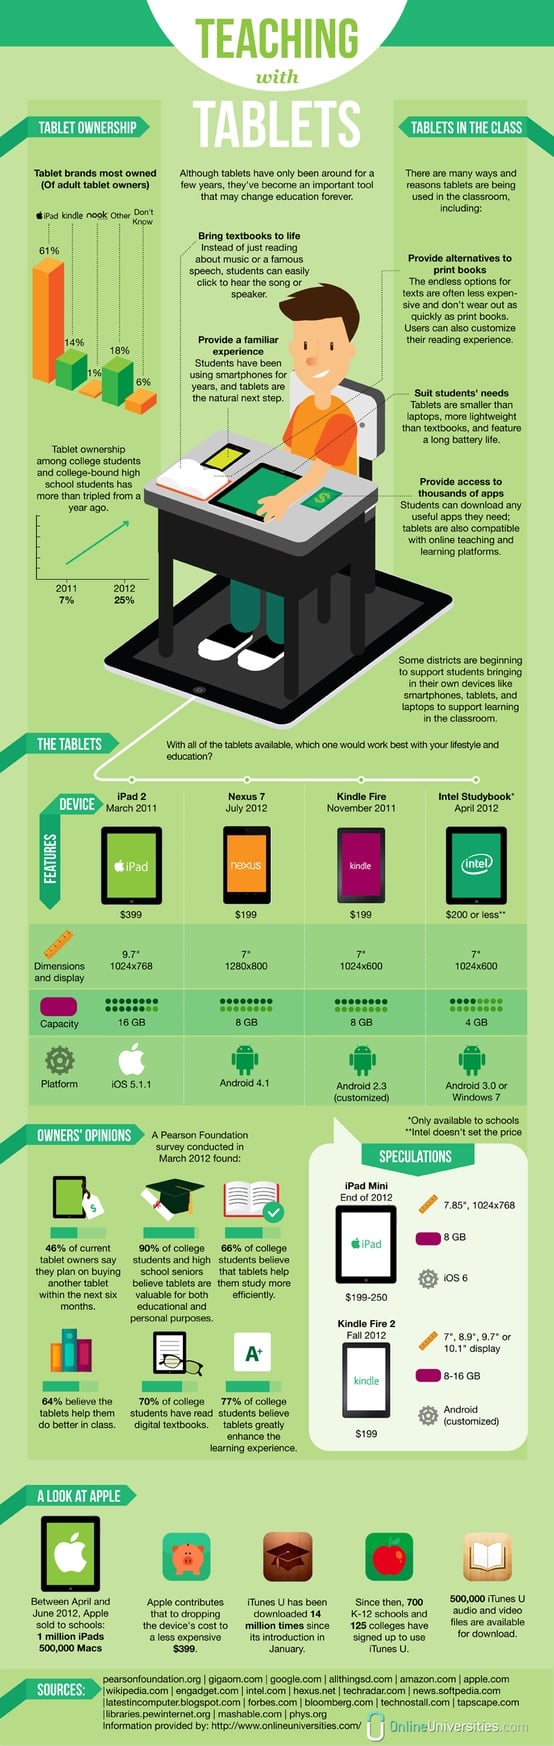 iPads in the Classroom: Changing Education (Infographic)